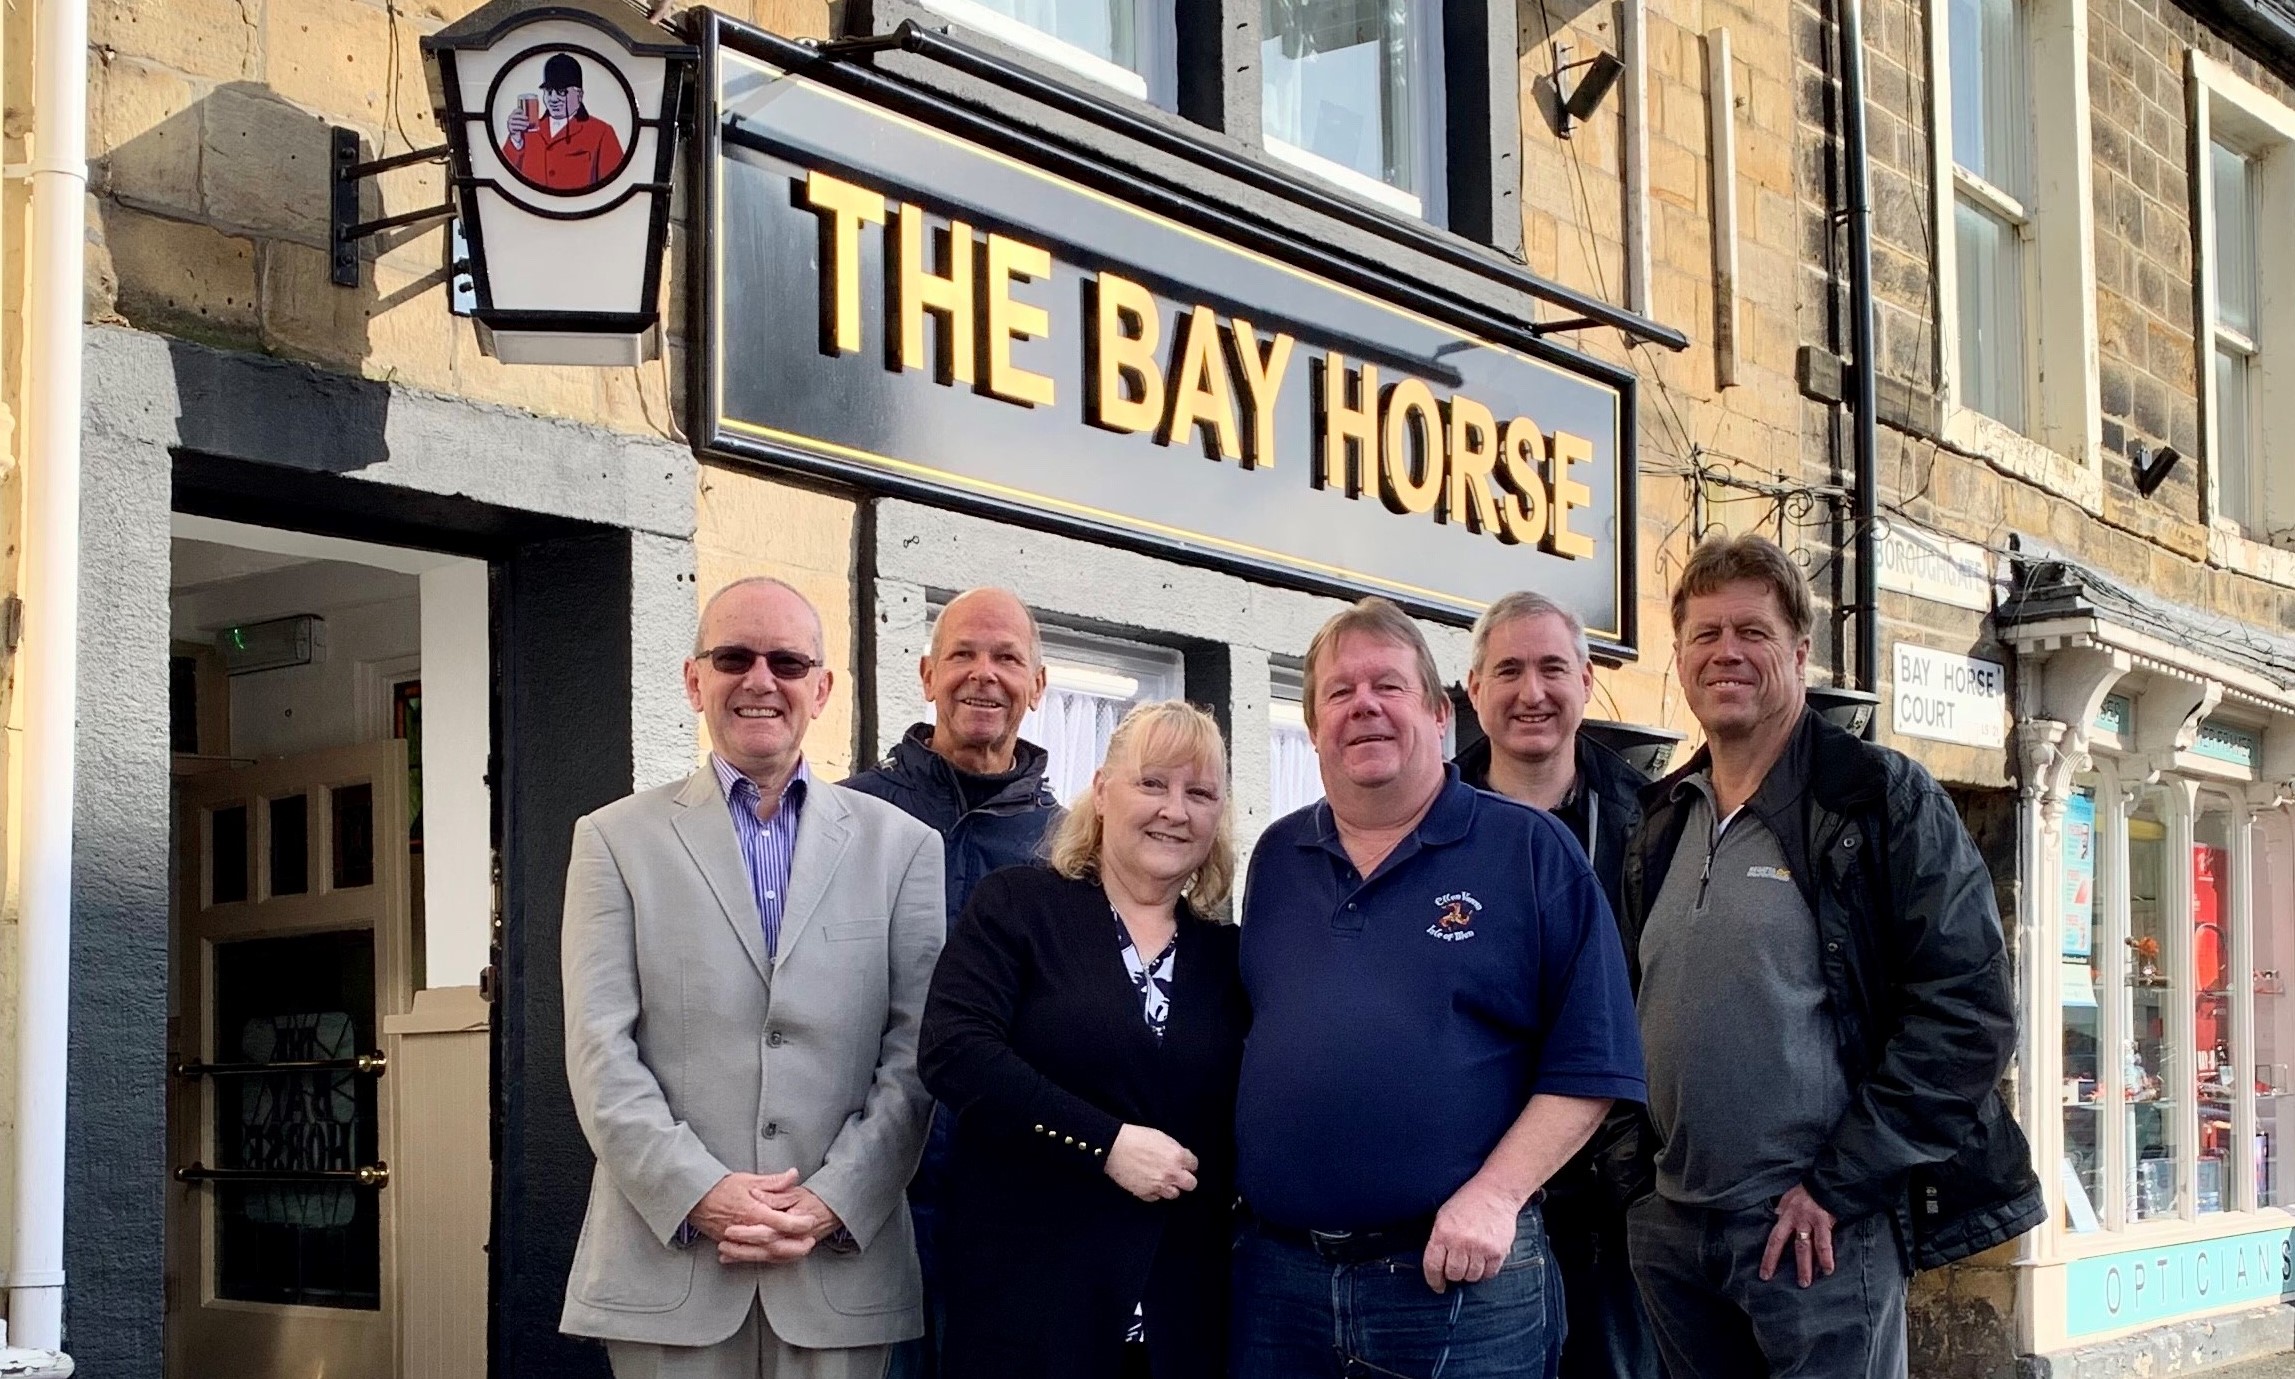 Otley Pub Club welcome refurbishment and re-opening of the Bay Horse